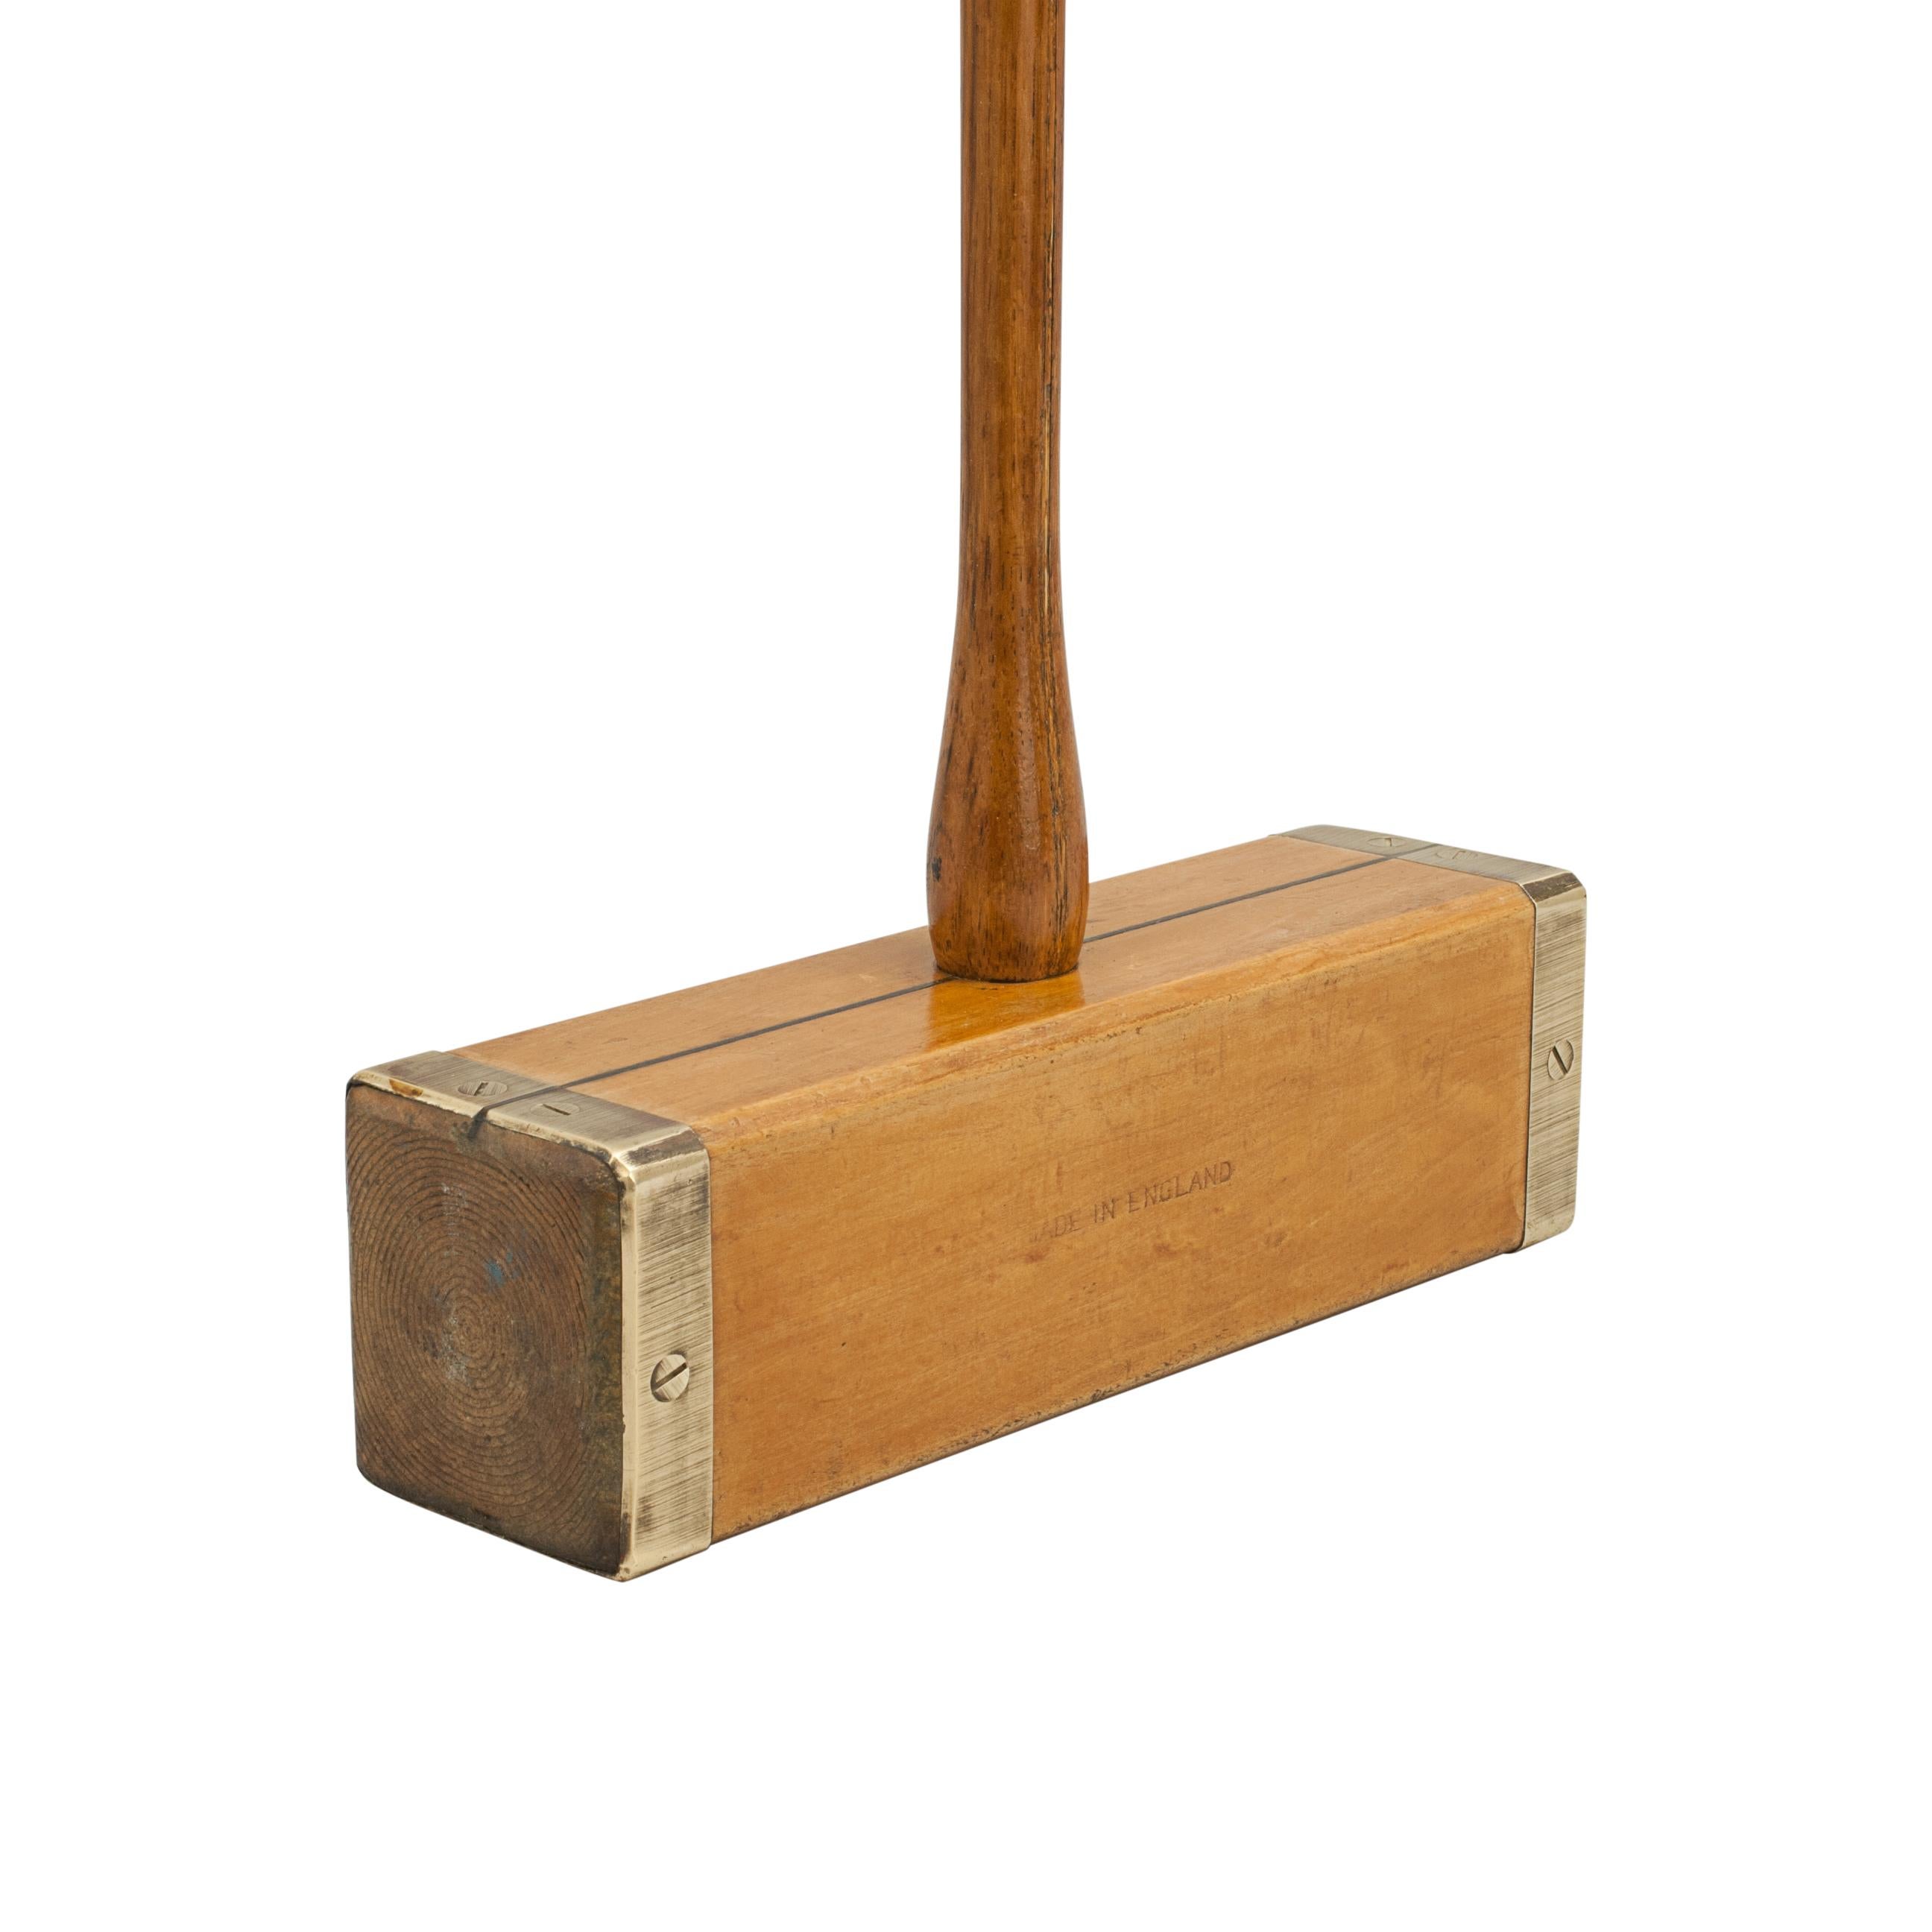 Vintage brass bound Jaques croquet mallet.

A good square head, brass bound boxwood croquet mallet by Jaques. The square head with line guide, attached to a sprung hickory handle with thumb grip at the top and a restrung cord handle. A good usable